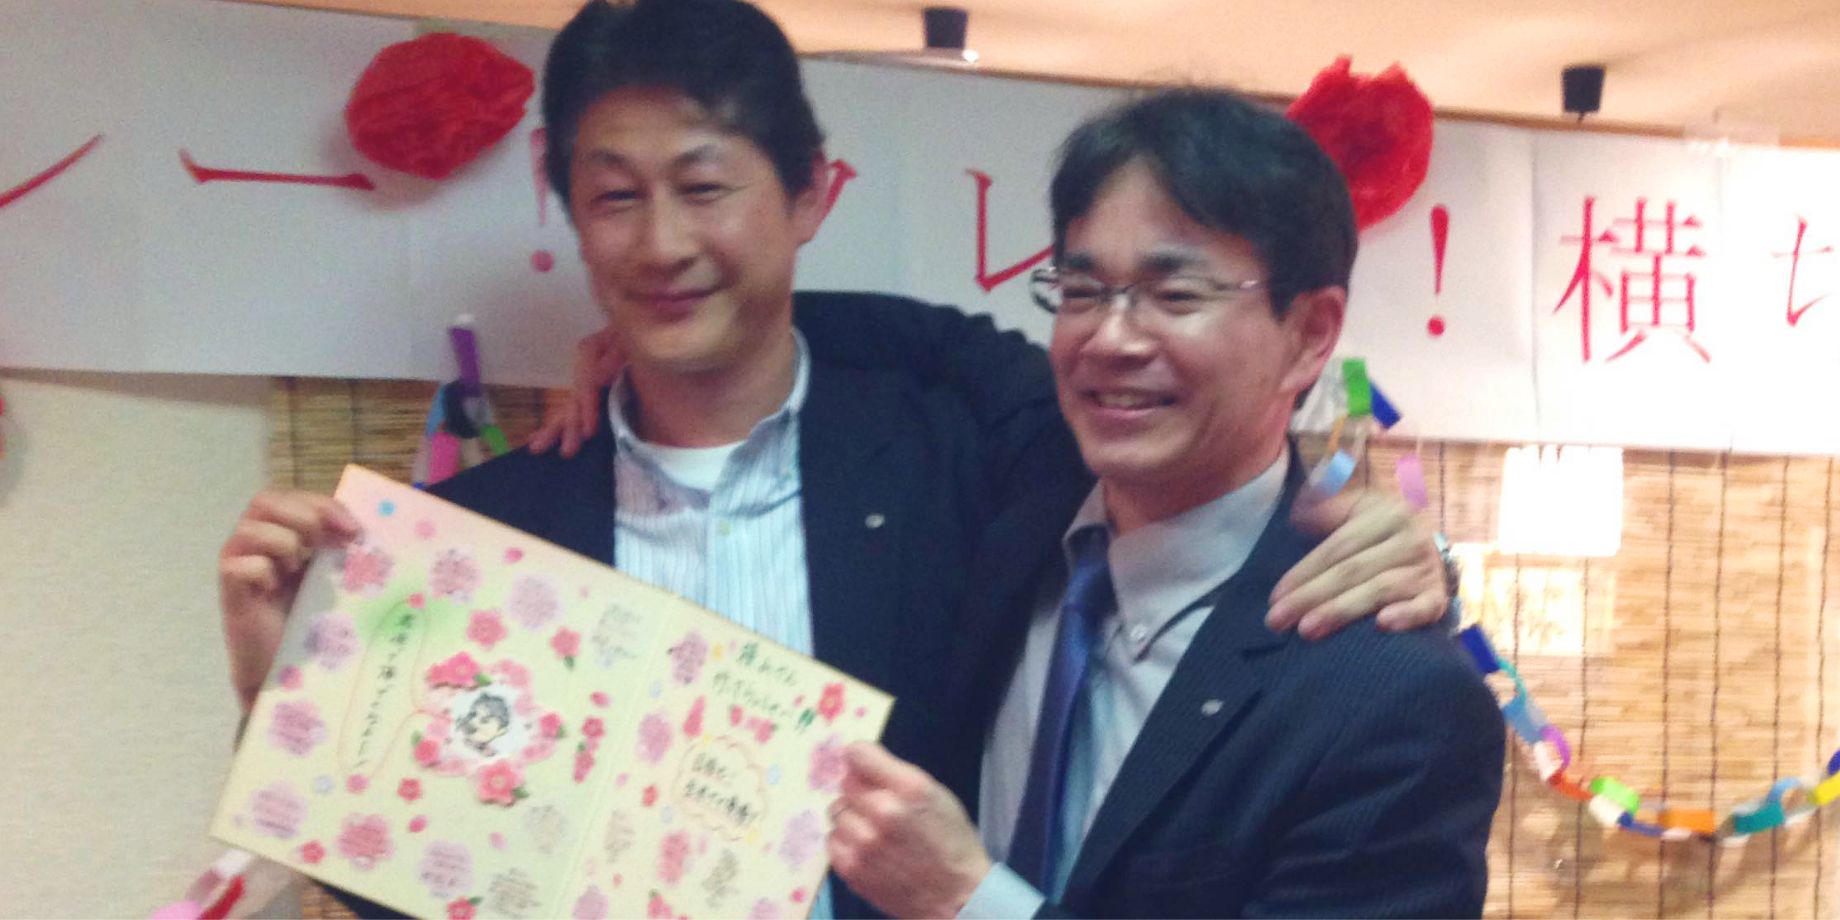 Send-off party for then-supervisor (left), with whom he worked until late every day in the Project Business Division